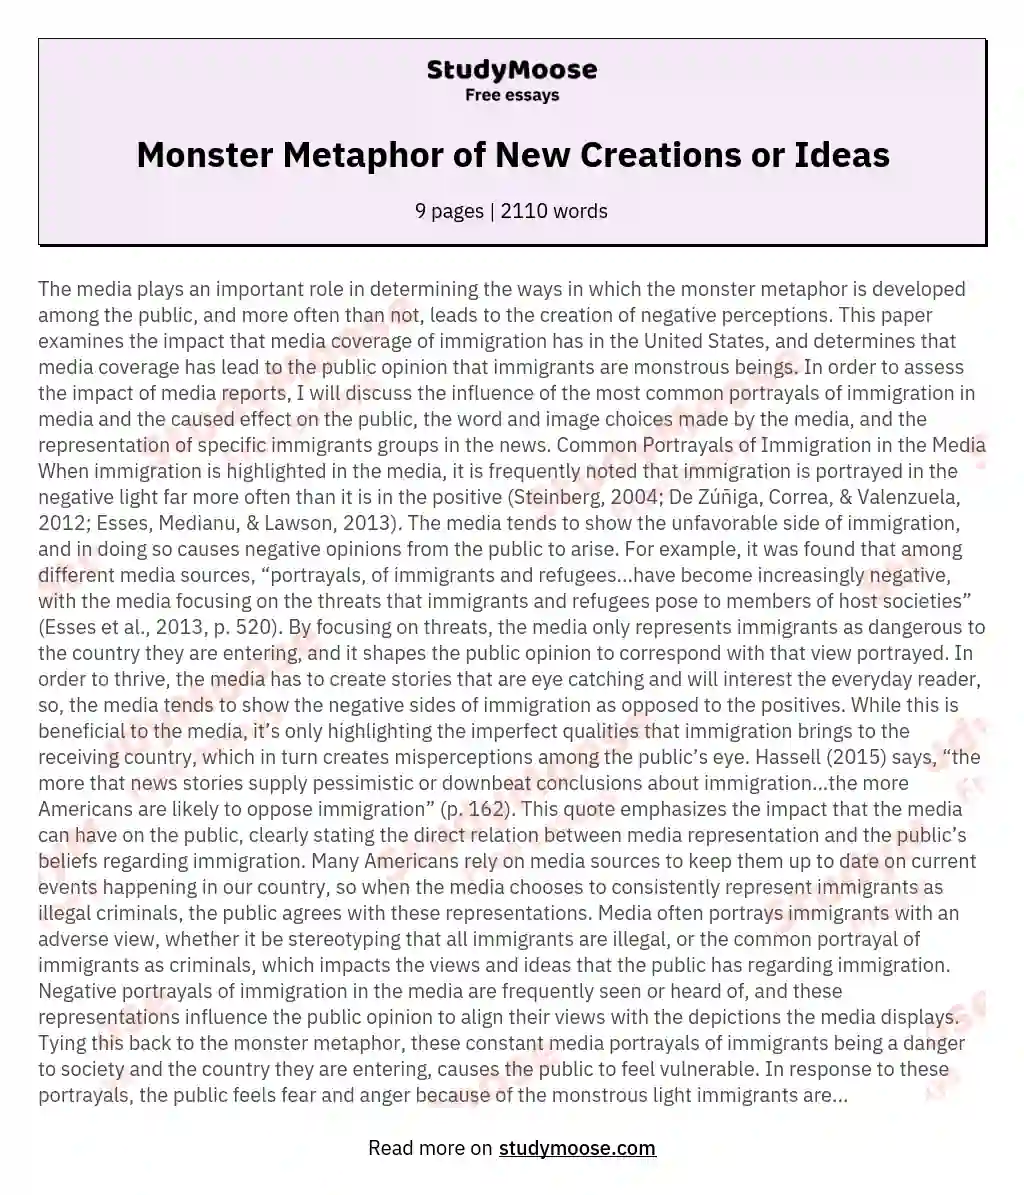 Monster Metaphor of New Creations or Ideas essay